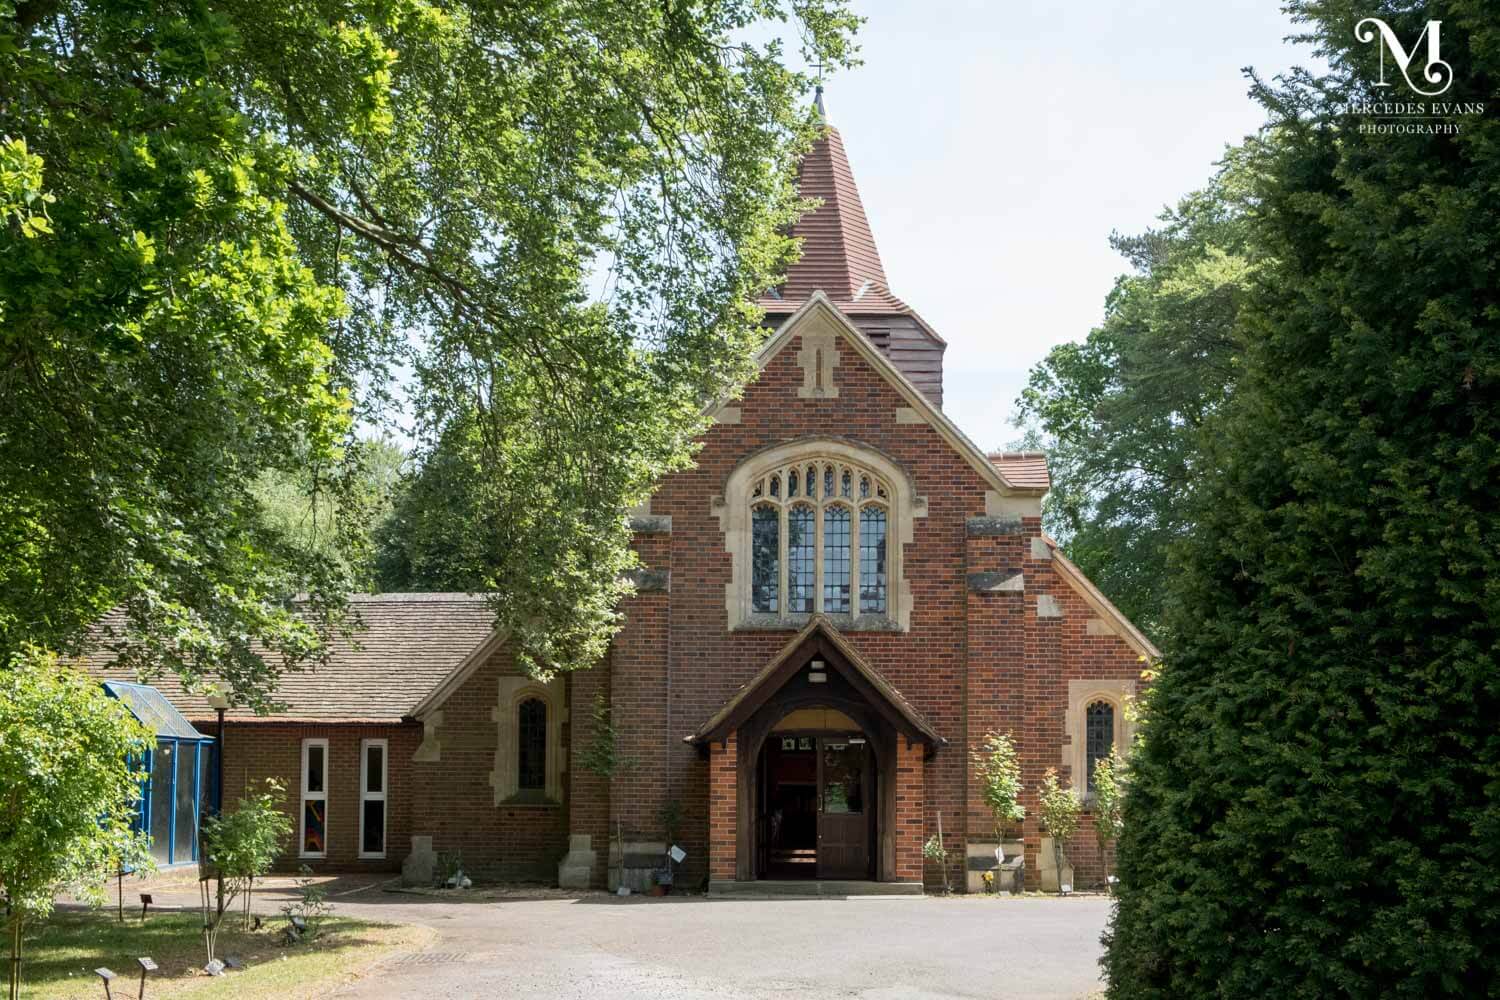 St Andrew's church in Frimley